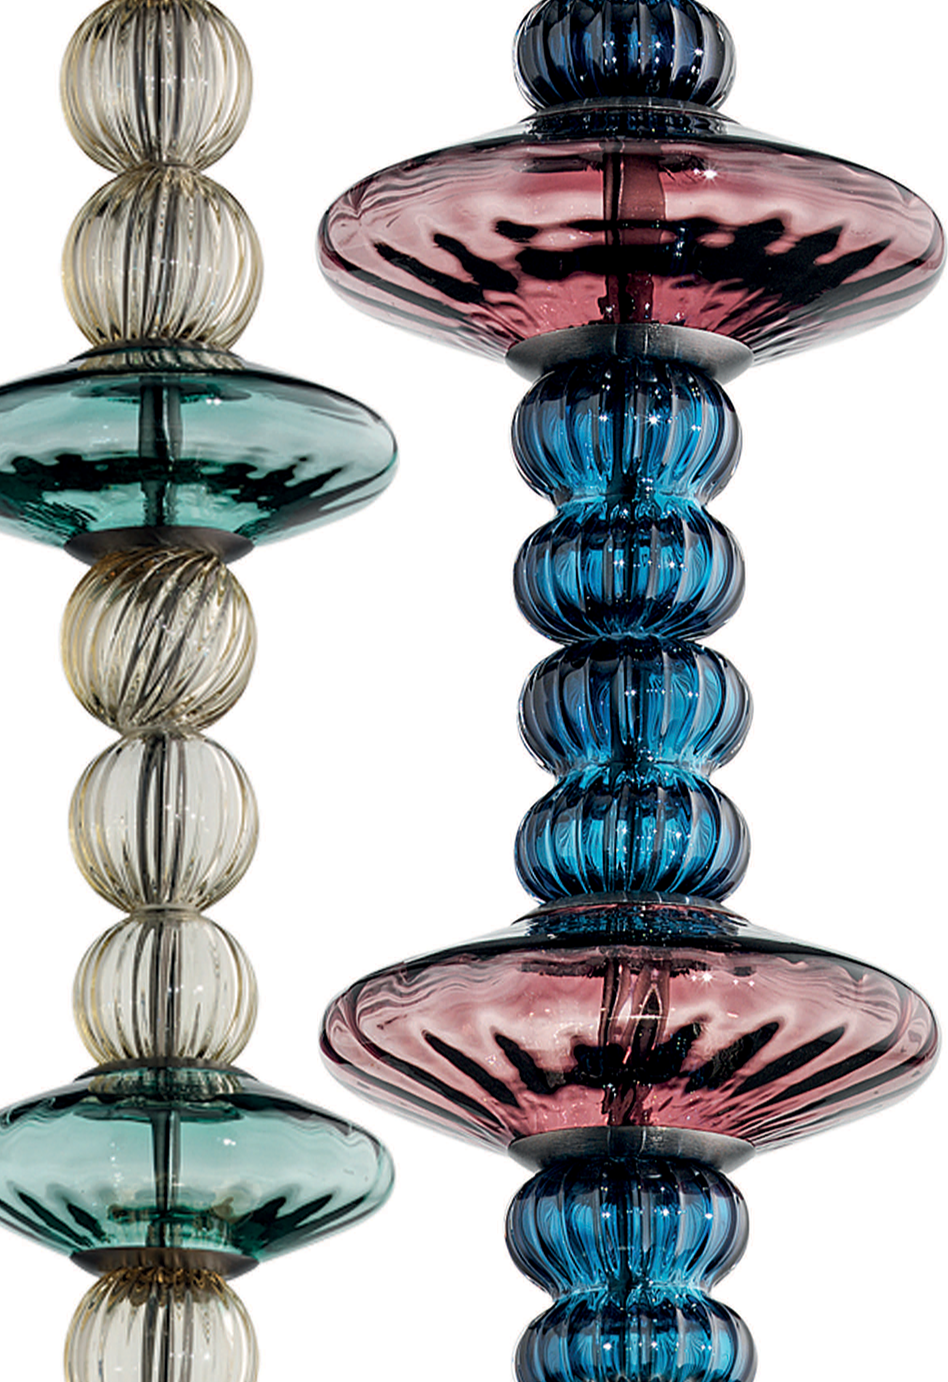 Handcrafted Artistic Single Pendant Ceiling Lamp With Murano Glass And Lampshade.